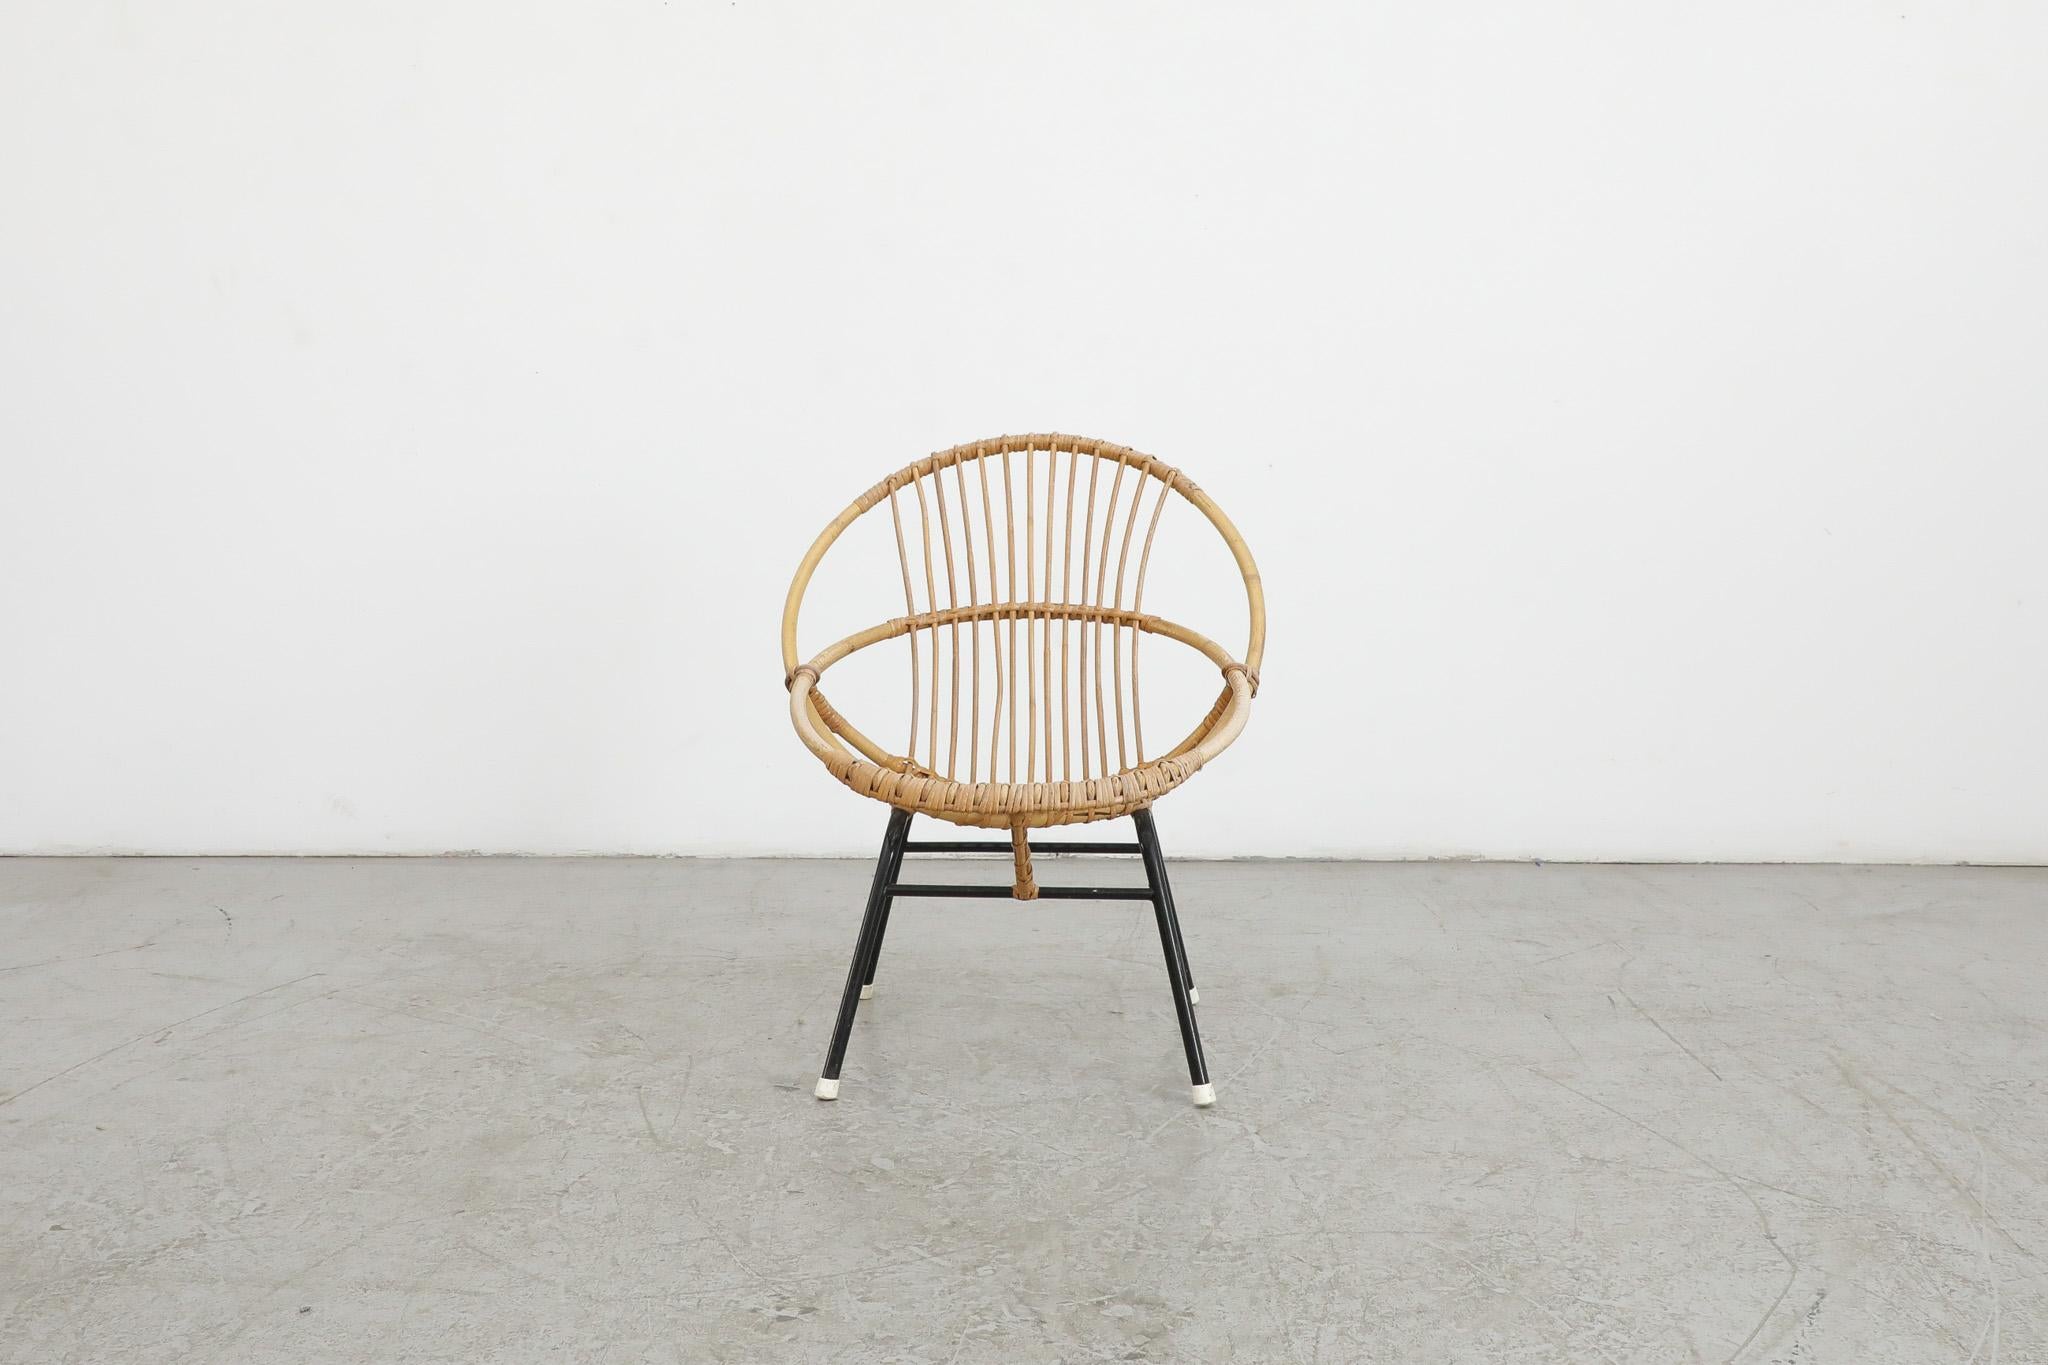 Little Mid-Century bamboo hoop chair by Rohe Noordwolde with Black enameled metal frame and white foot caps. In very original condition with visible wear and some breakage consistent with its age and use. Perfect for outdoors under a dry protected